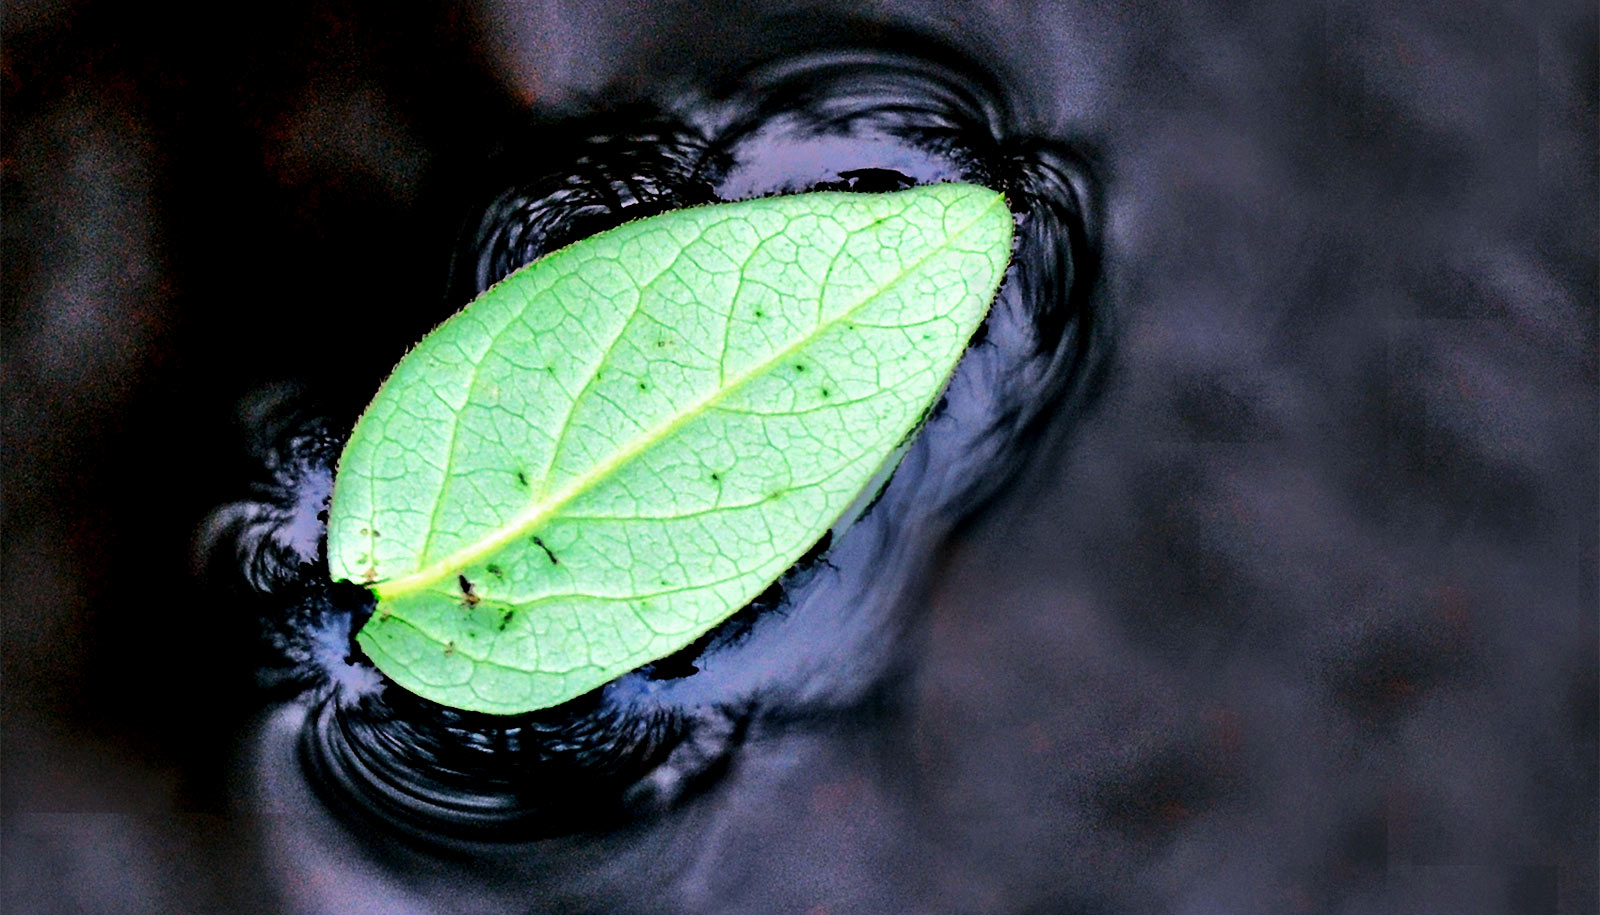 'Artificial leaf' splits water to make sustainable power - Futurity: Research News